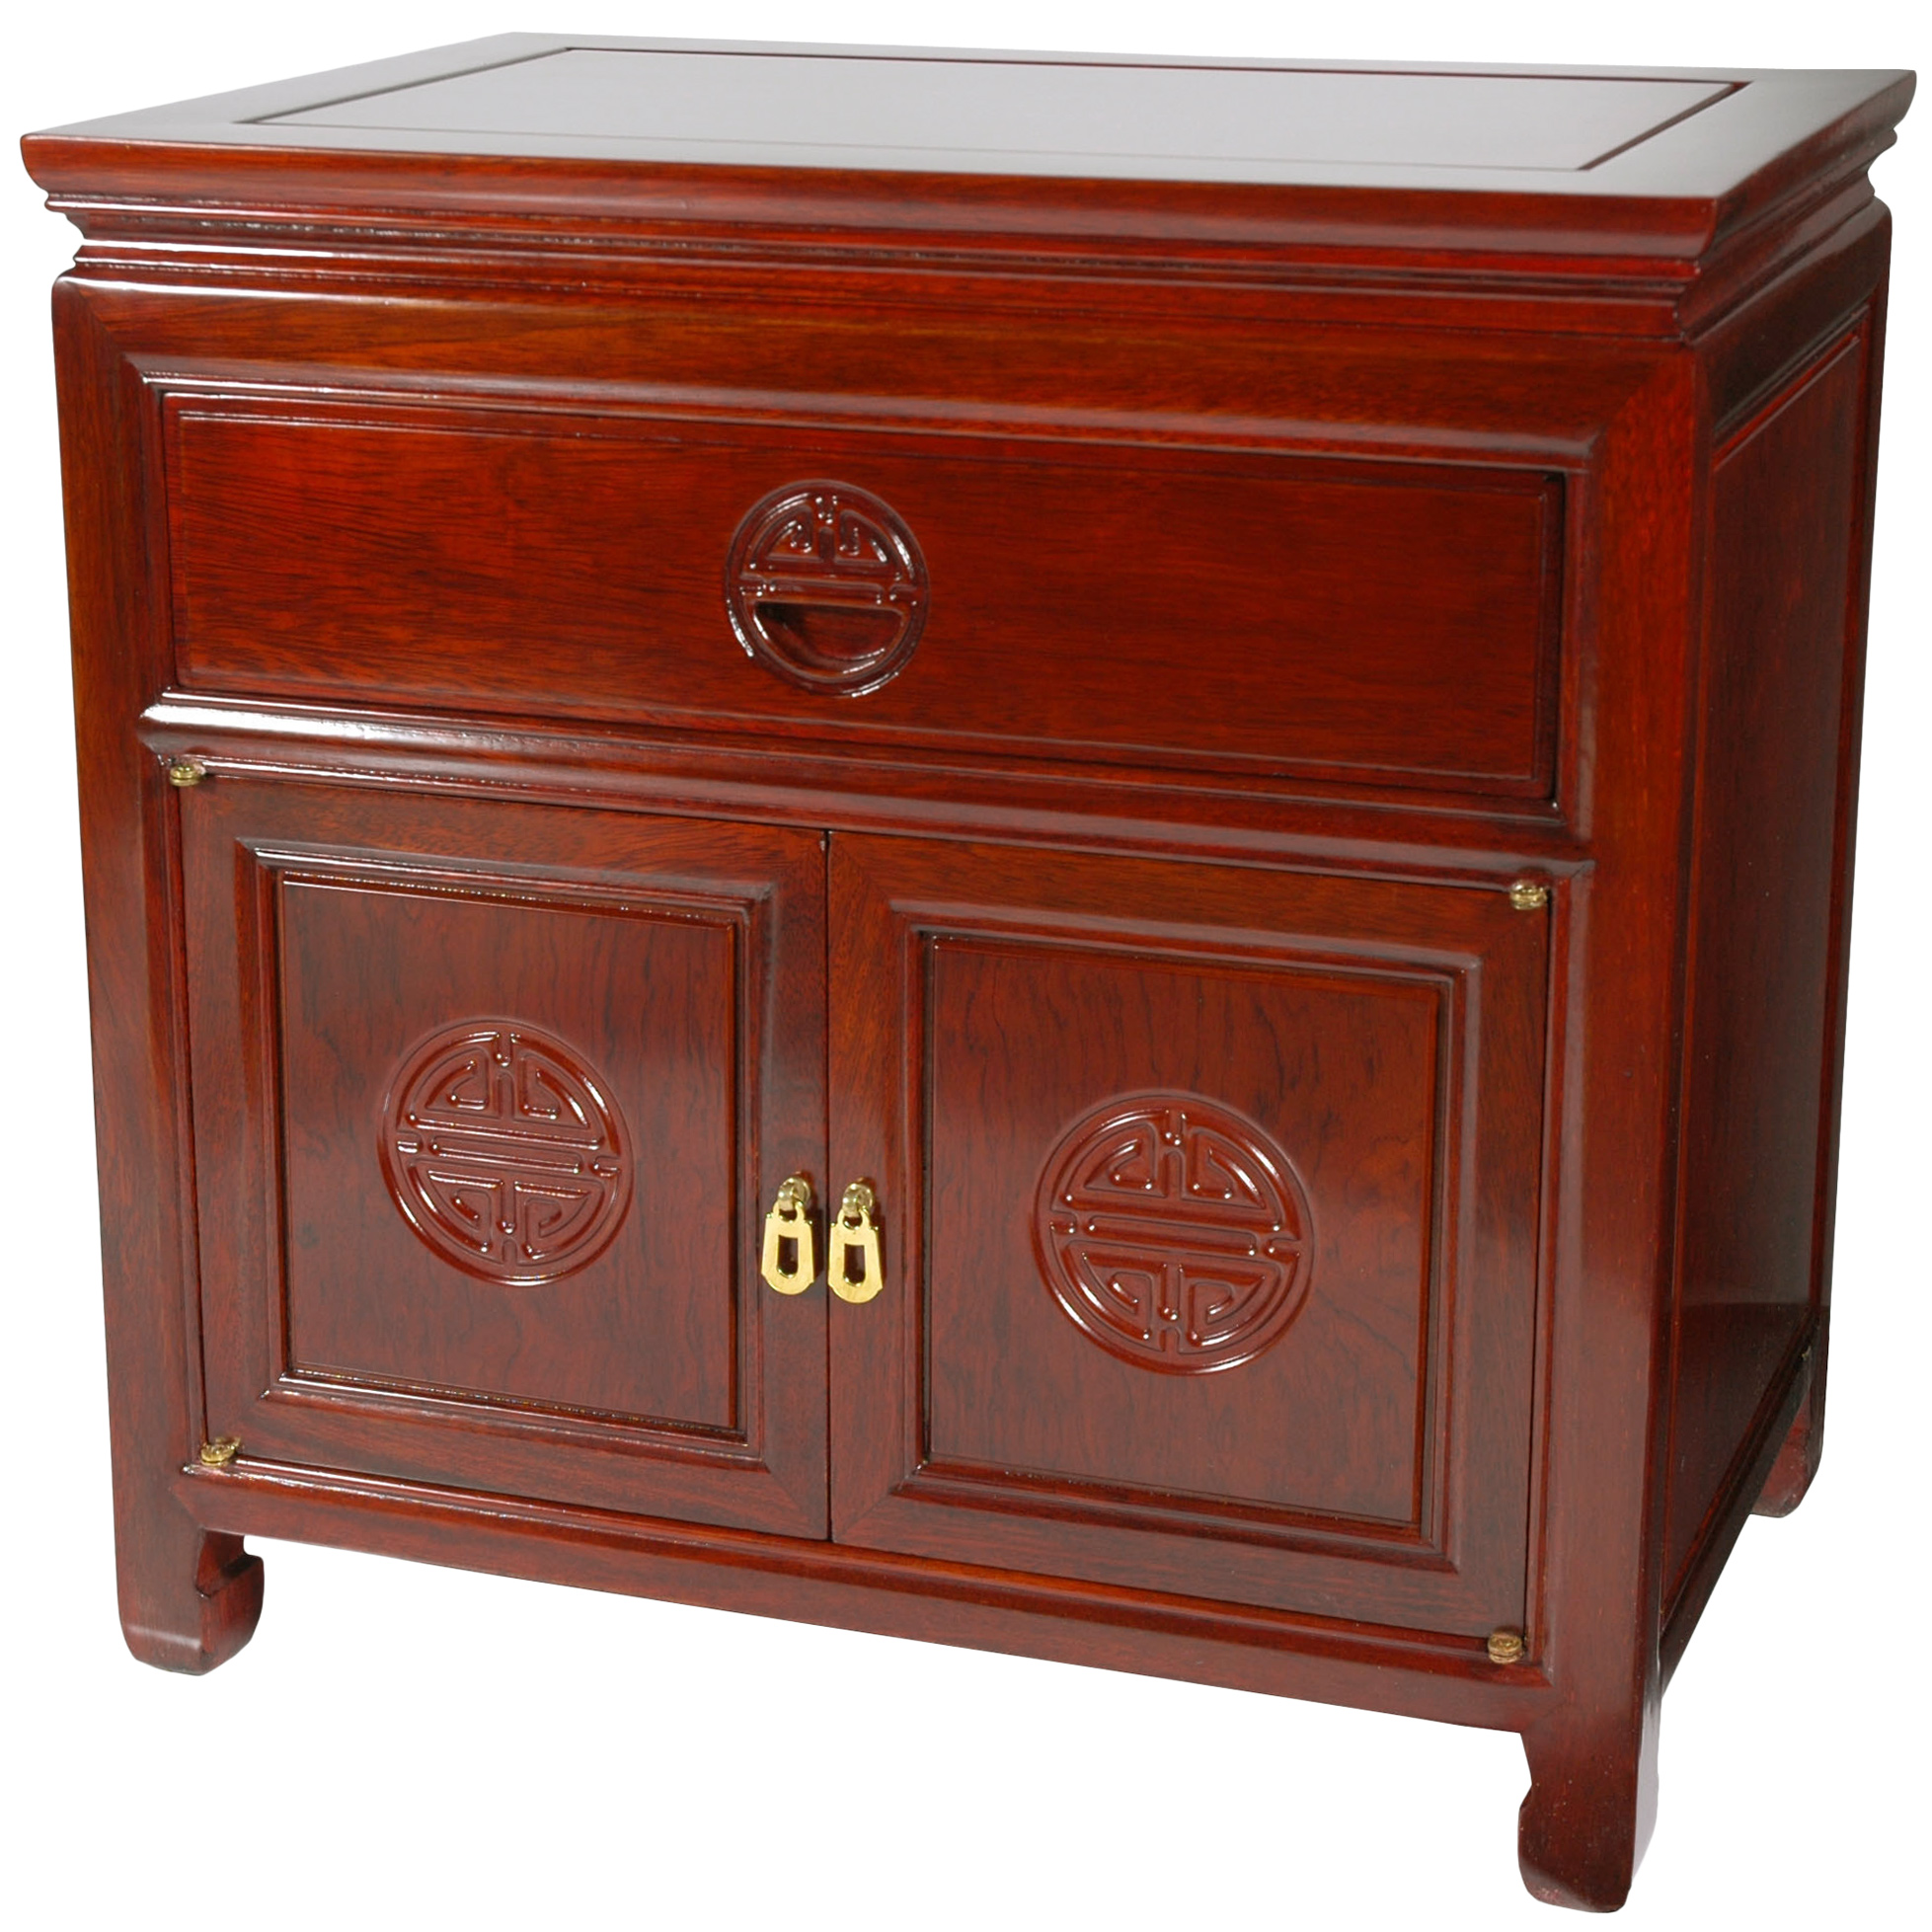 Buy Rosewood Bedside Cabinet Online St Pa102d Satisfaction Guaranteed